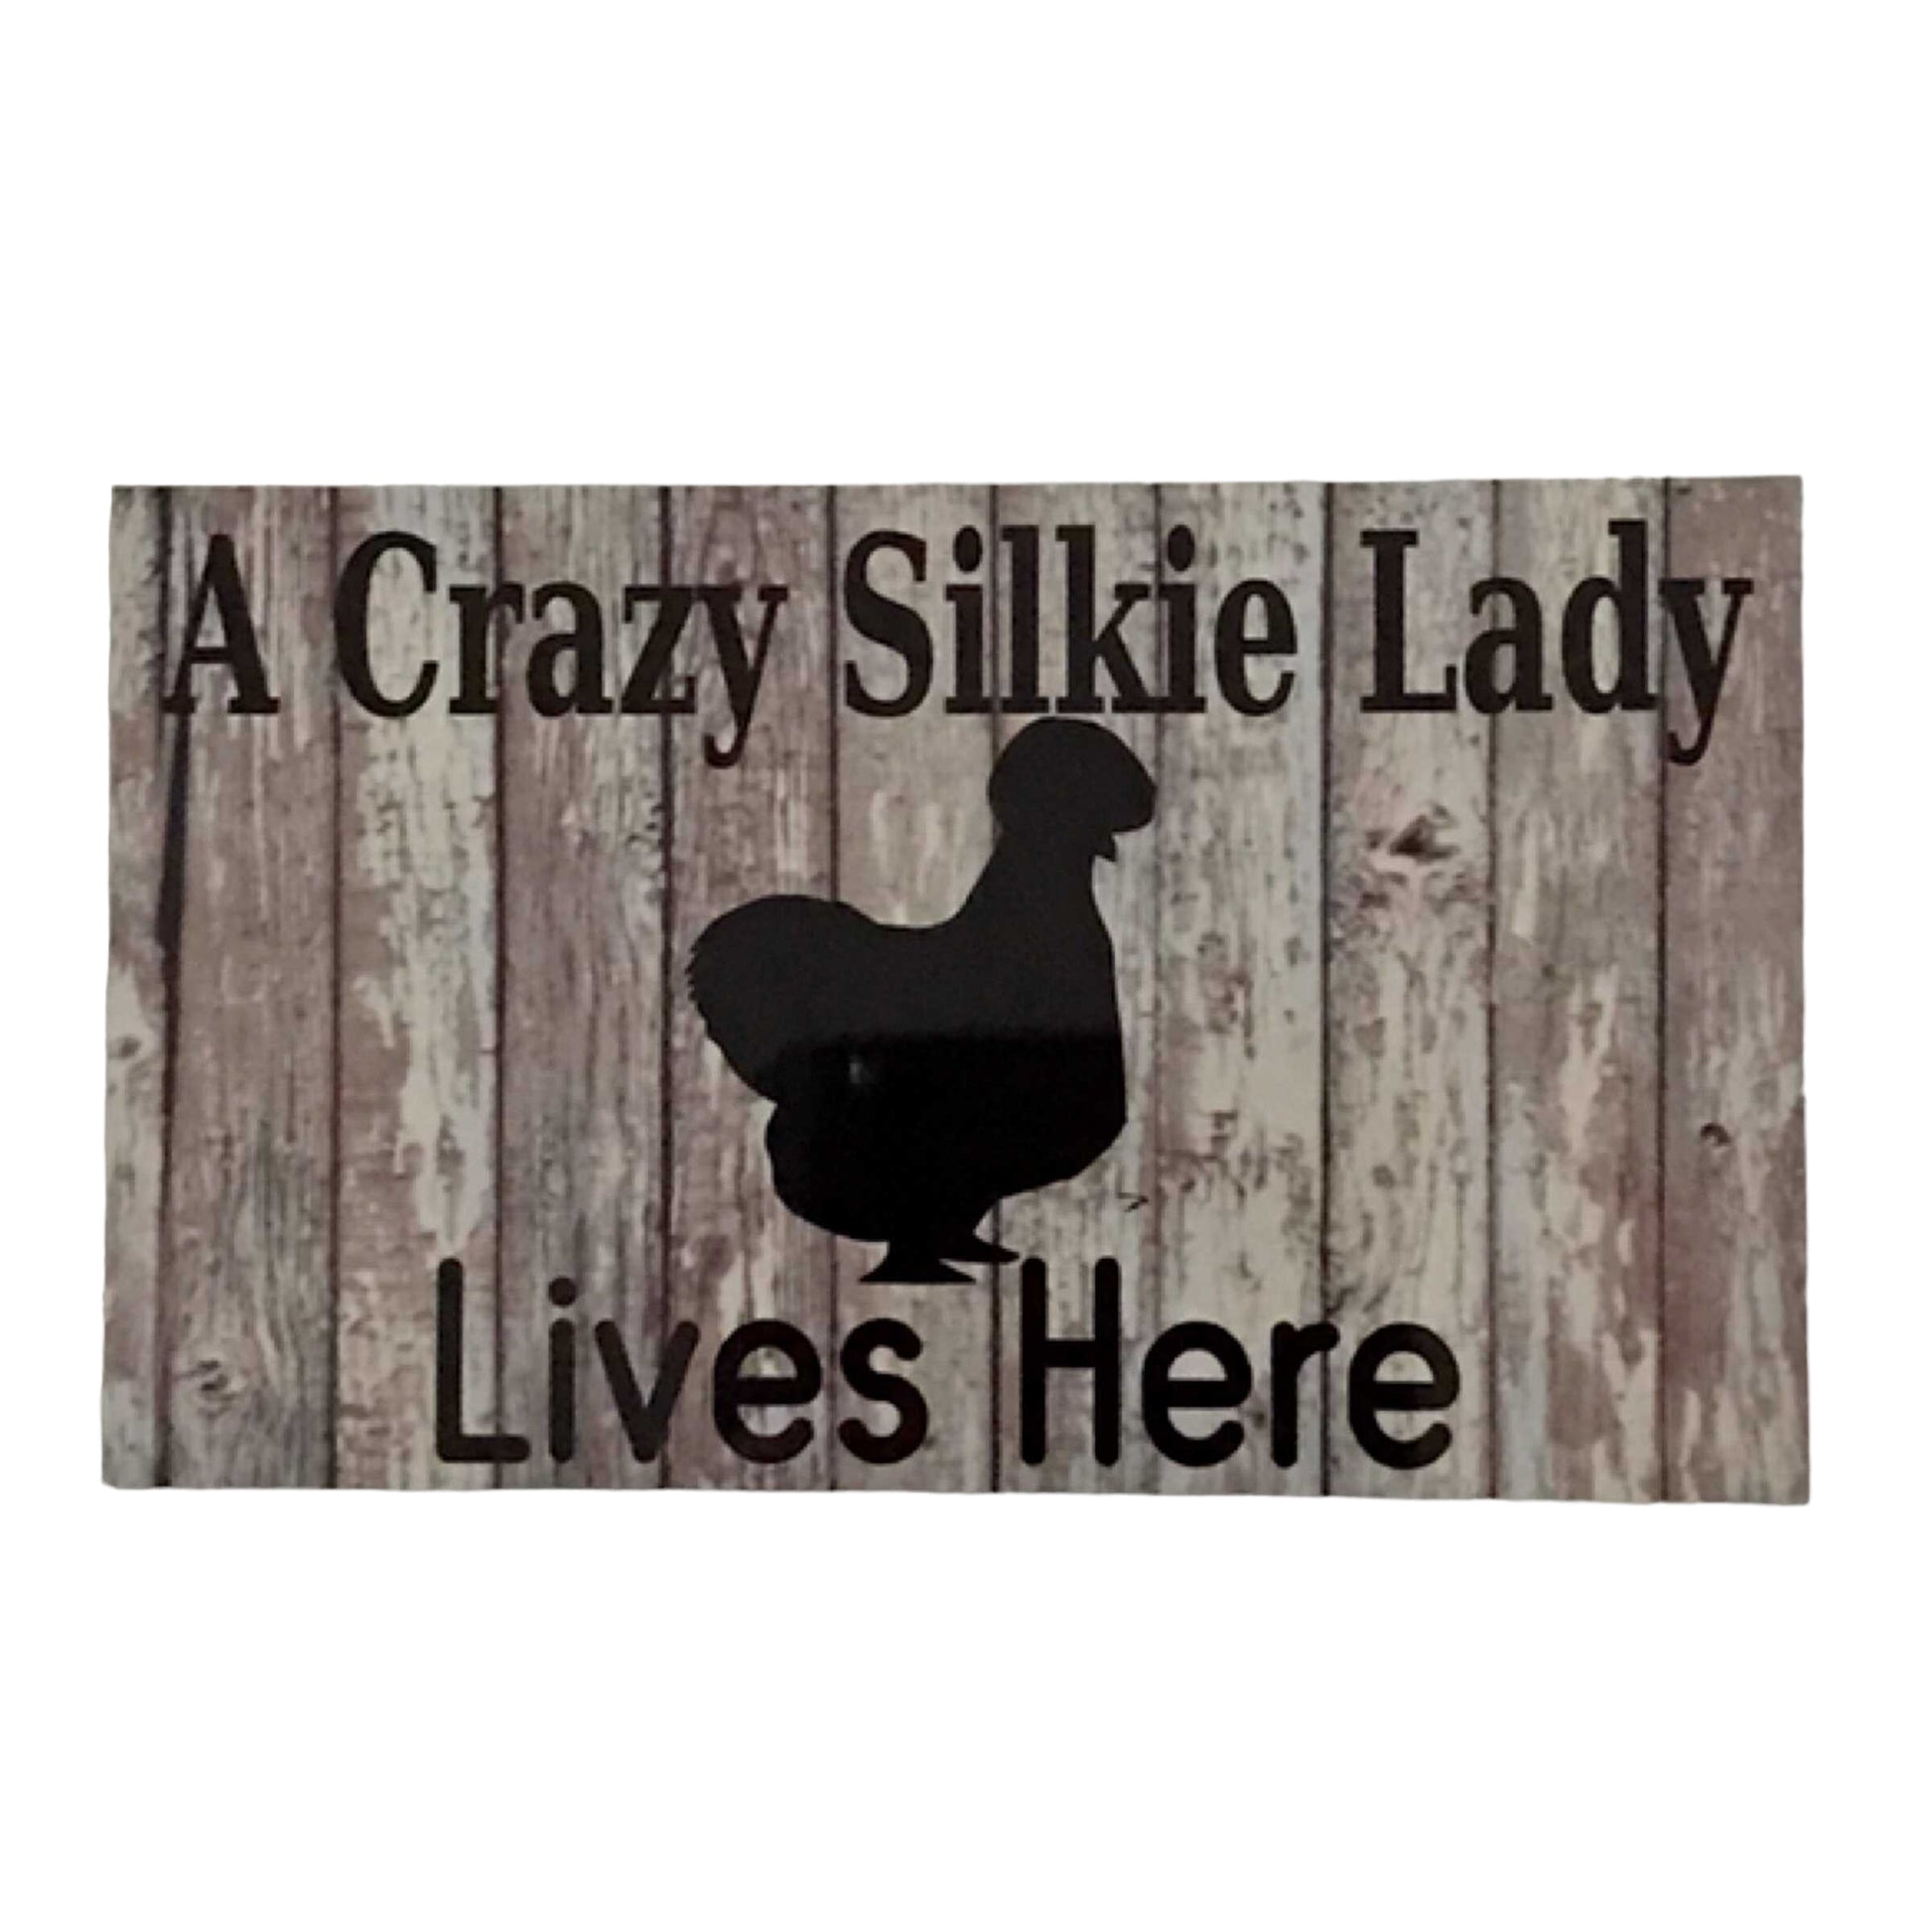 Crazy Chicken Silkie Lady Lives Here Sign - The Renmy Store Homewares & Gifts 